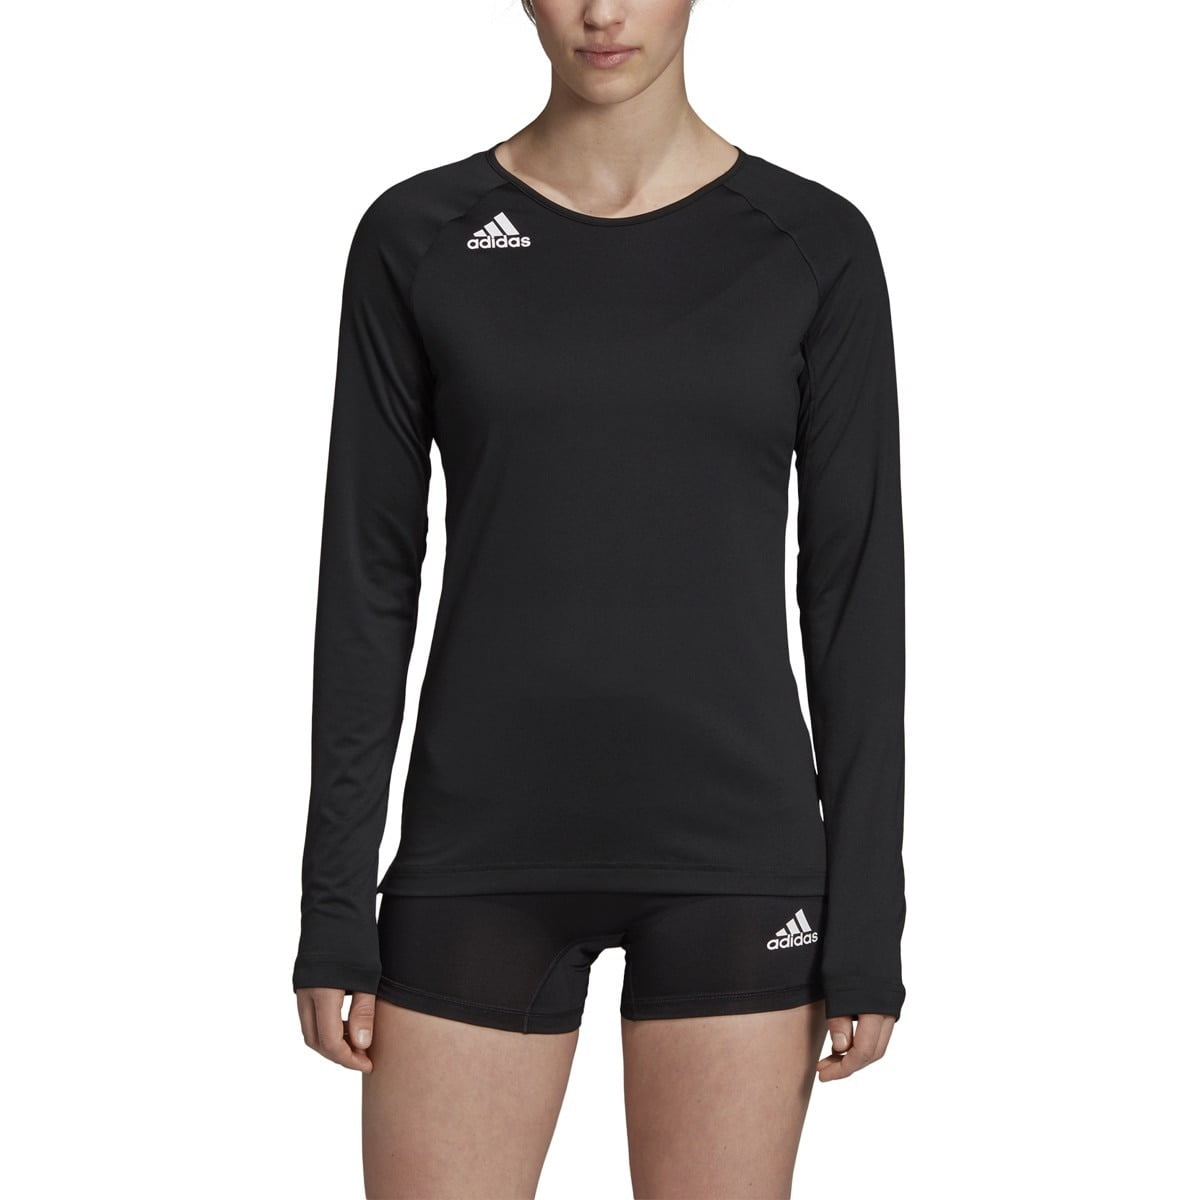 Adidas HILO Women's Long Sleeve Volleyball Jersey DX0887 - Black ...